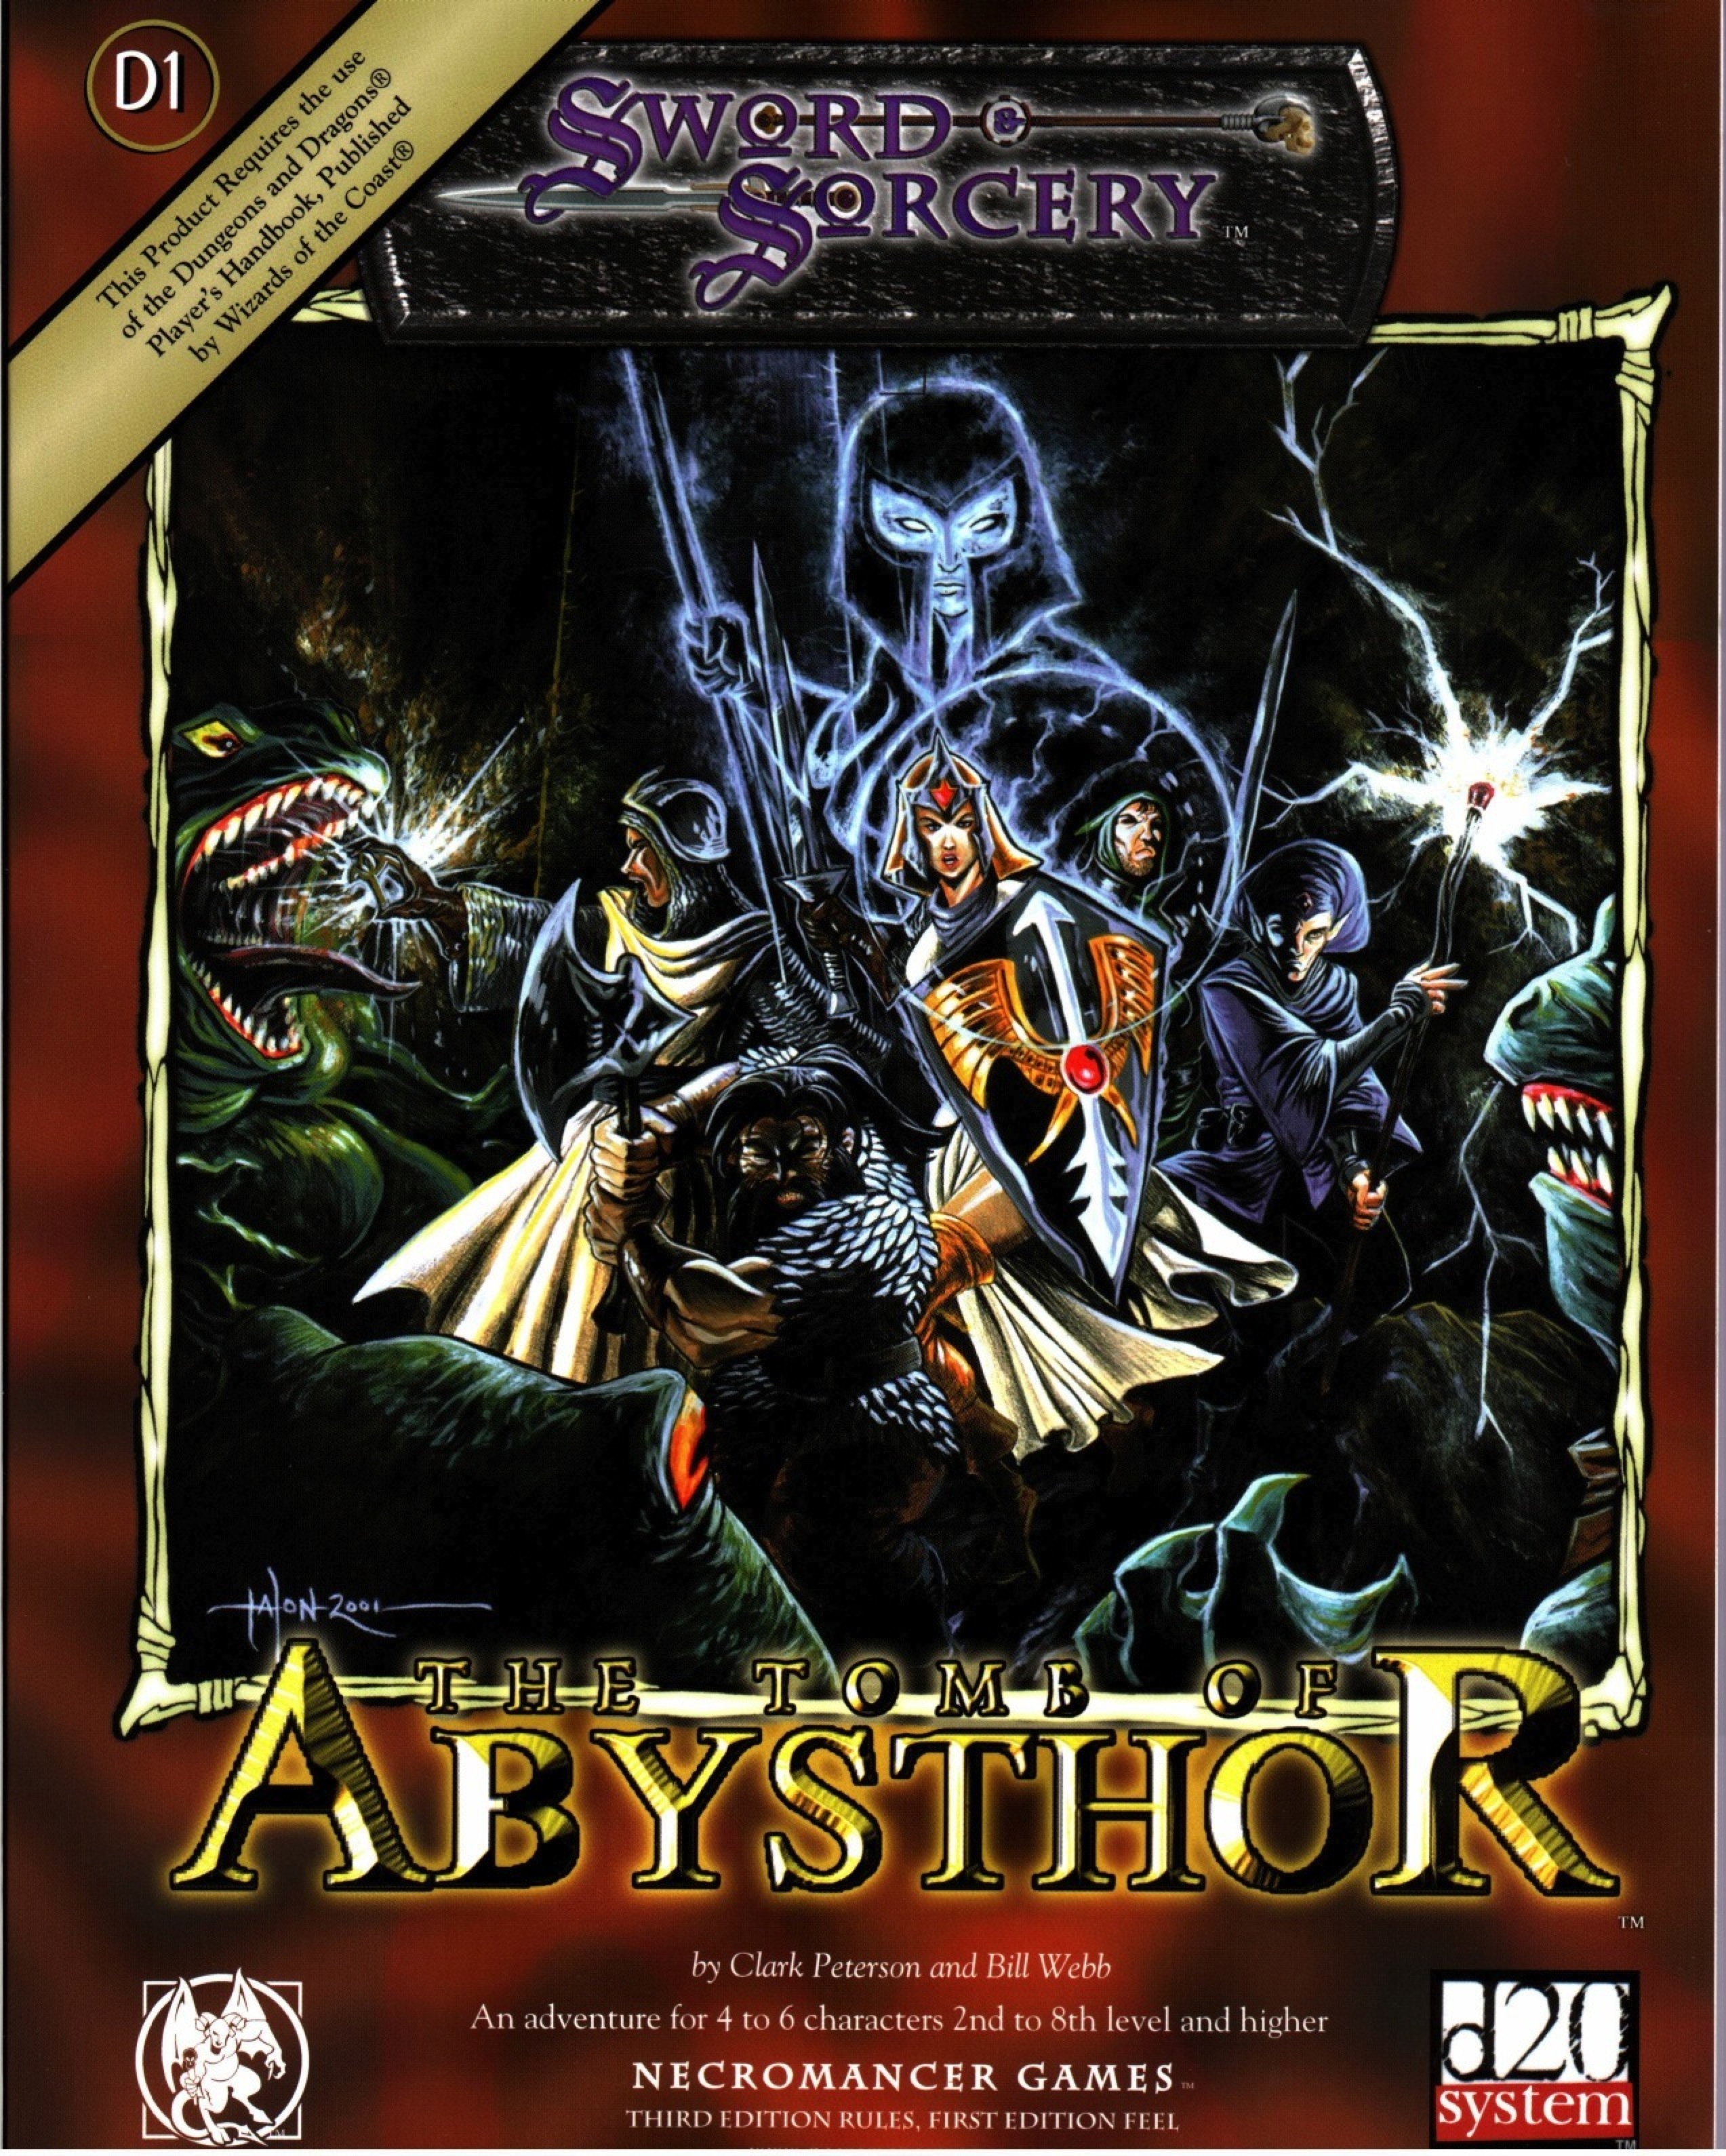 Cover of Tomb of Abysthor